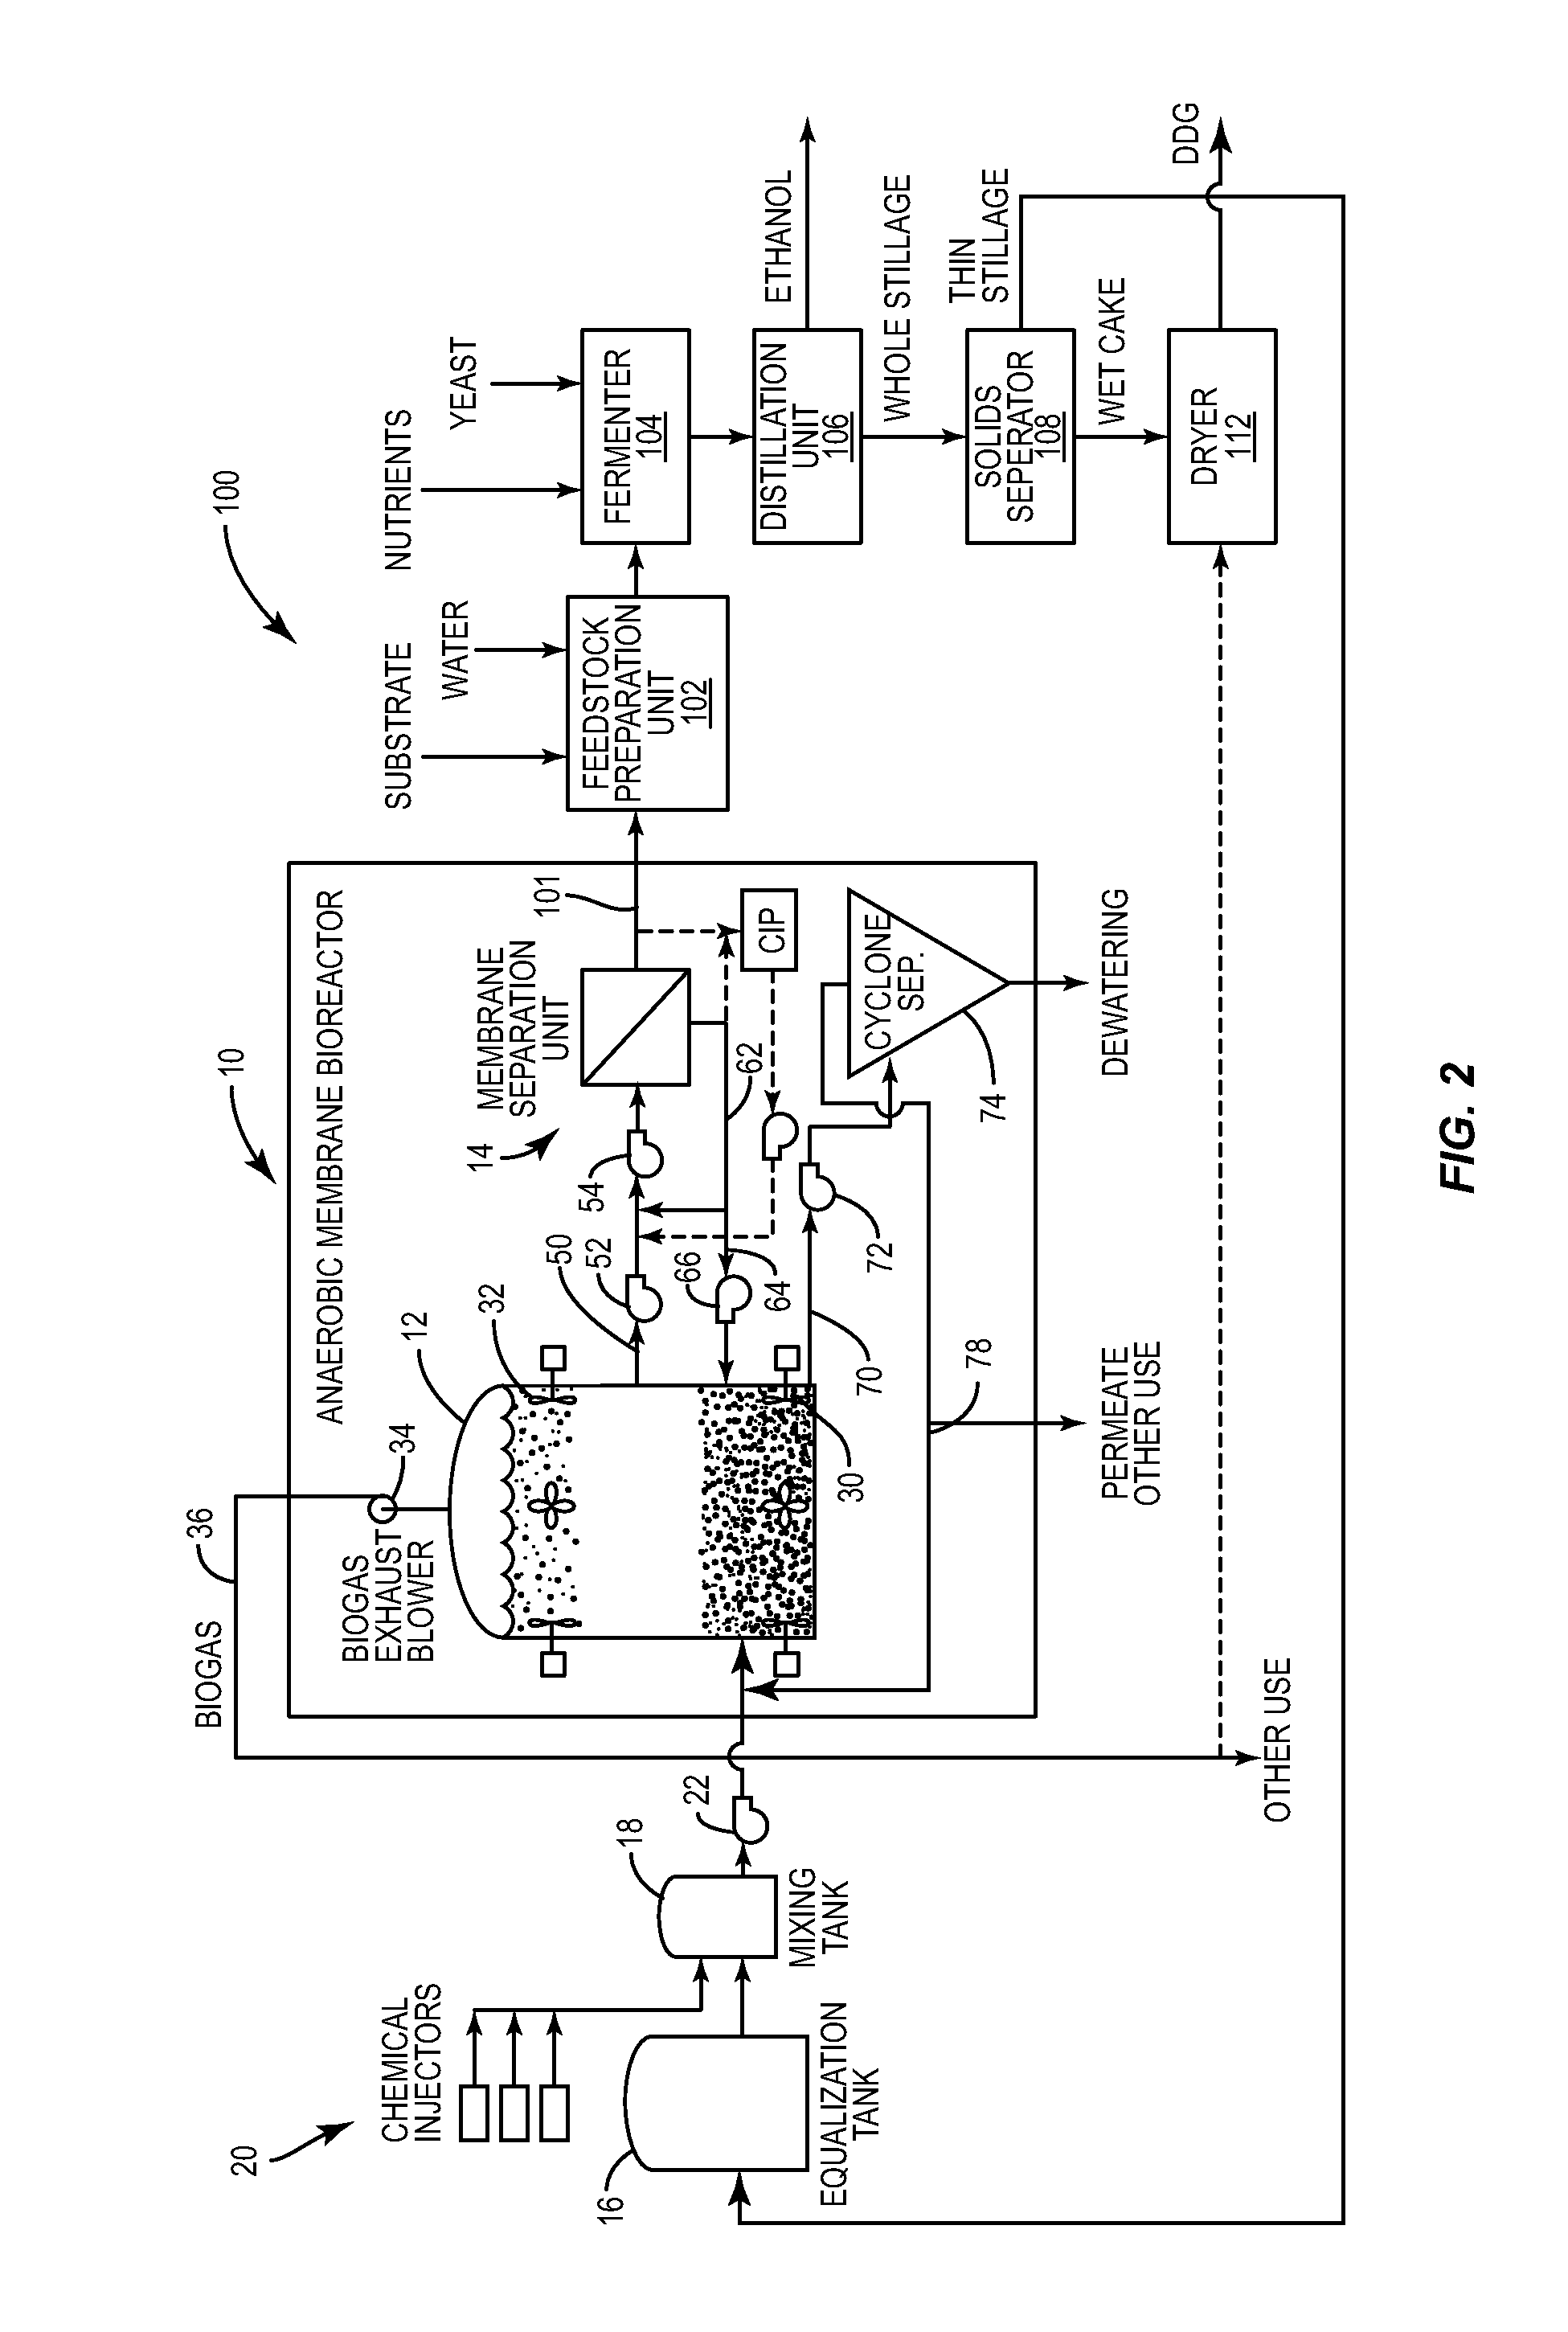 System and Method for Producing Ethanol and Biogas